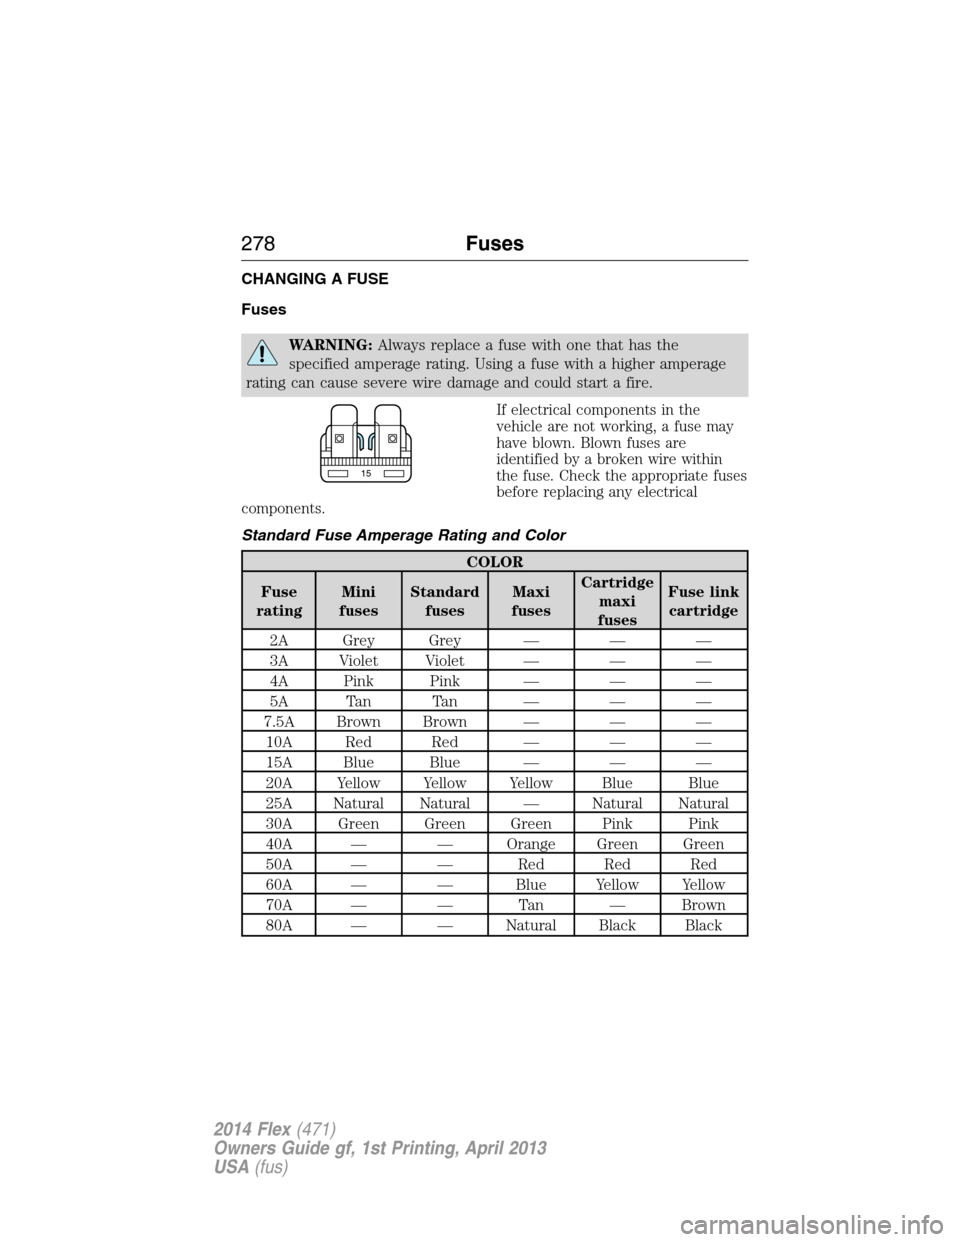 FORD FLEX 2014 1.G Owners Manual CHANGING A FUSE
Fuses
WARNING:Always replace a fuse with one that has the
specified amperage rating. Using a fuse with a higher amperage
rating can cause severe wire damage and could start a fire.
If 